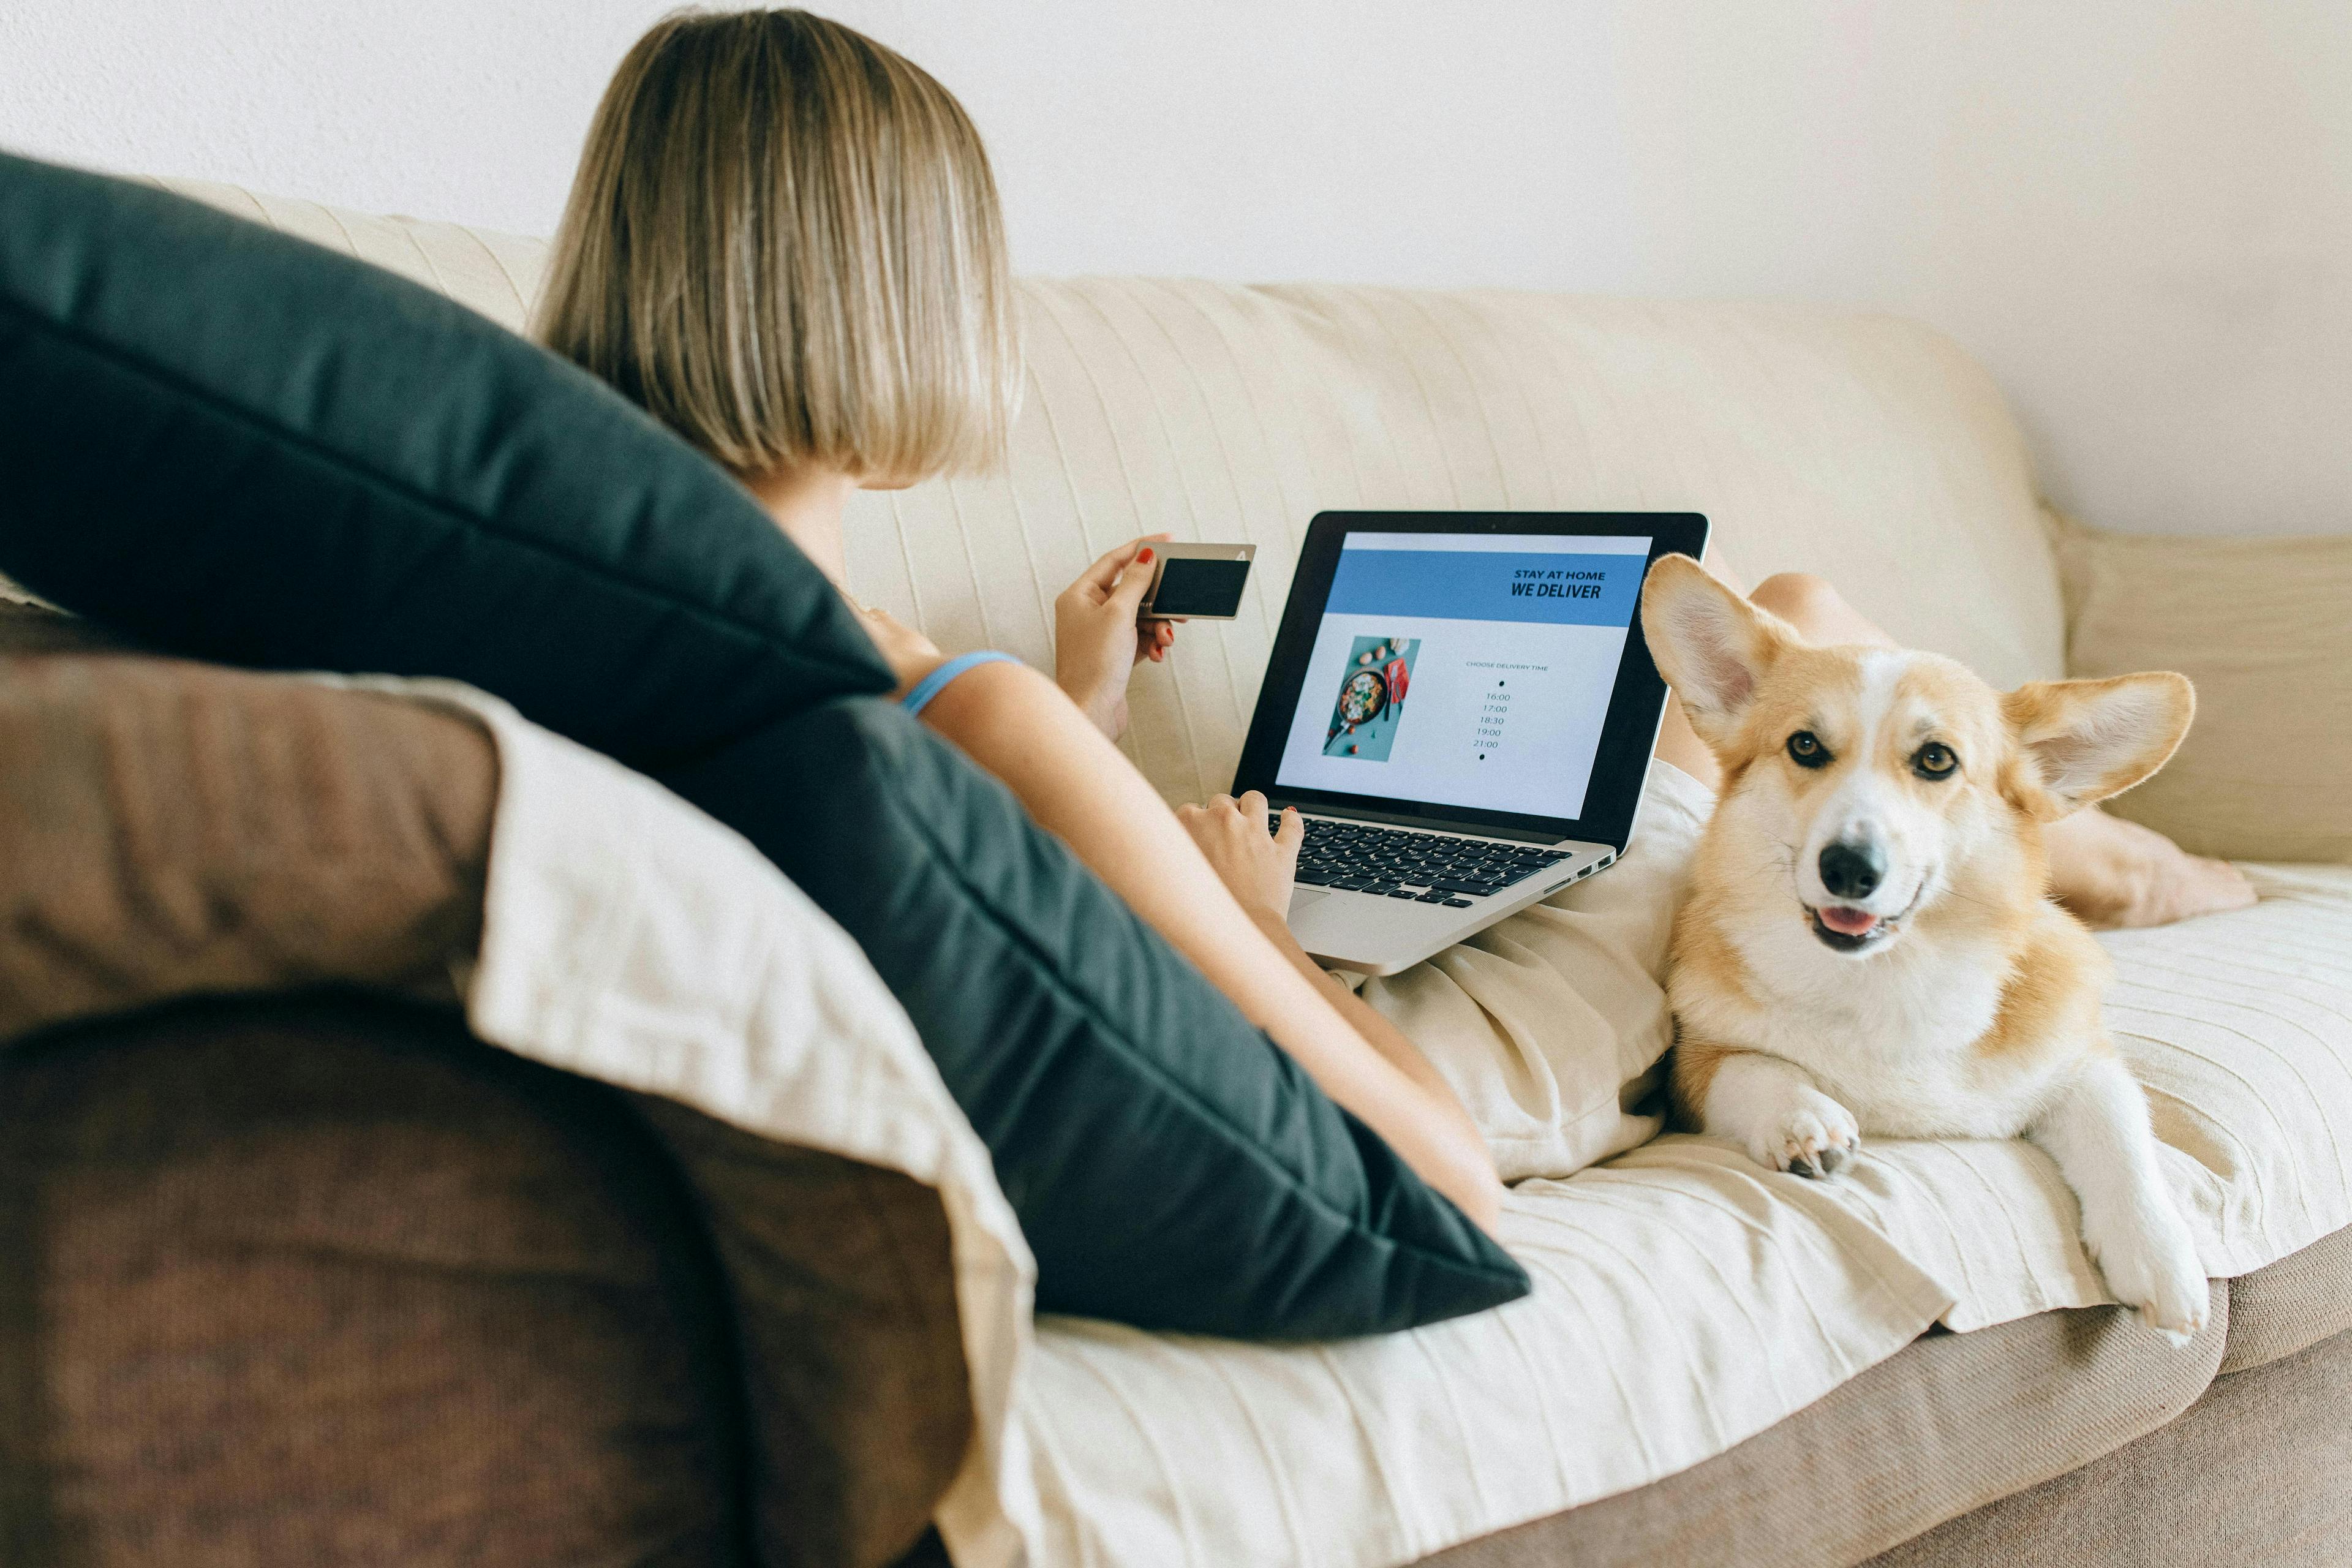 A woman lying on a couch with a laptop on her lap, holding a credit card. Next to her is a smiling corgi dog. The laptop screen displays an online delivery service with the text "STAY AT HOME WE DELIVER." This cozy and relaxed setting is perfect for showcasing testimonials on landing pages.